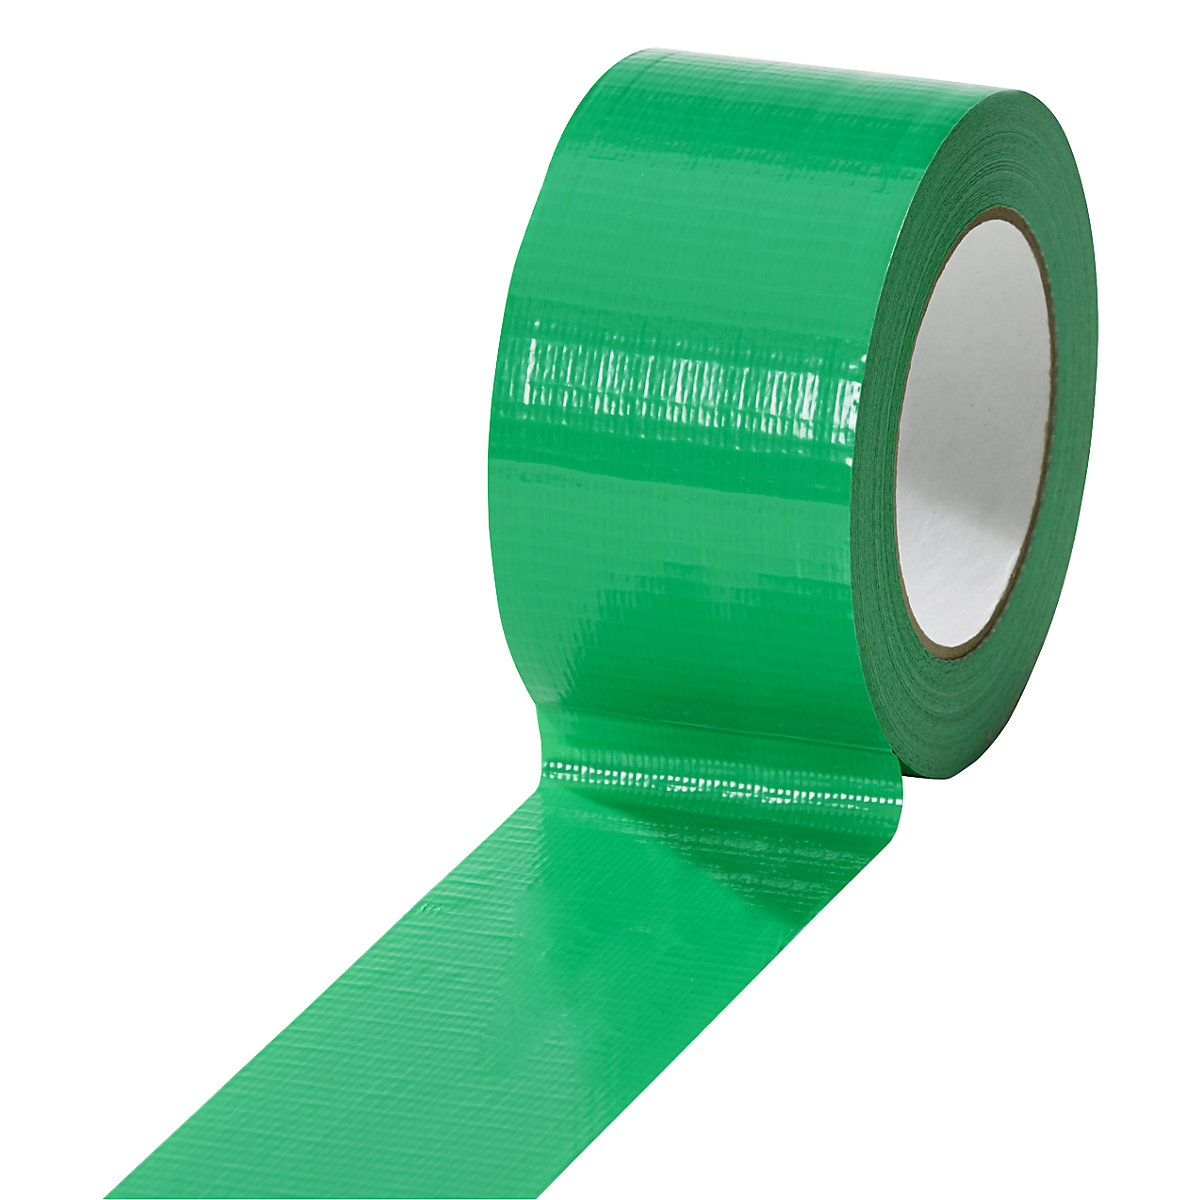 Fabric tape, in different colours, pack of 18 rolls, green, tape width 50 mm-13